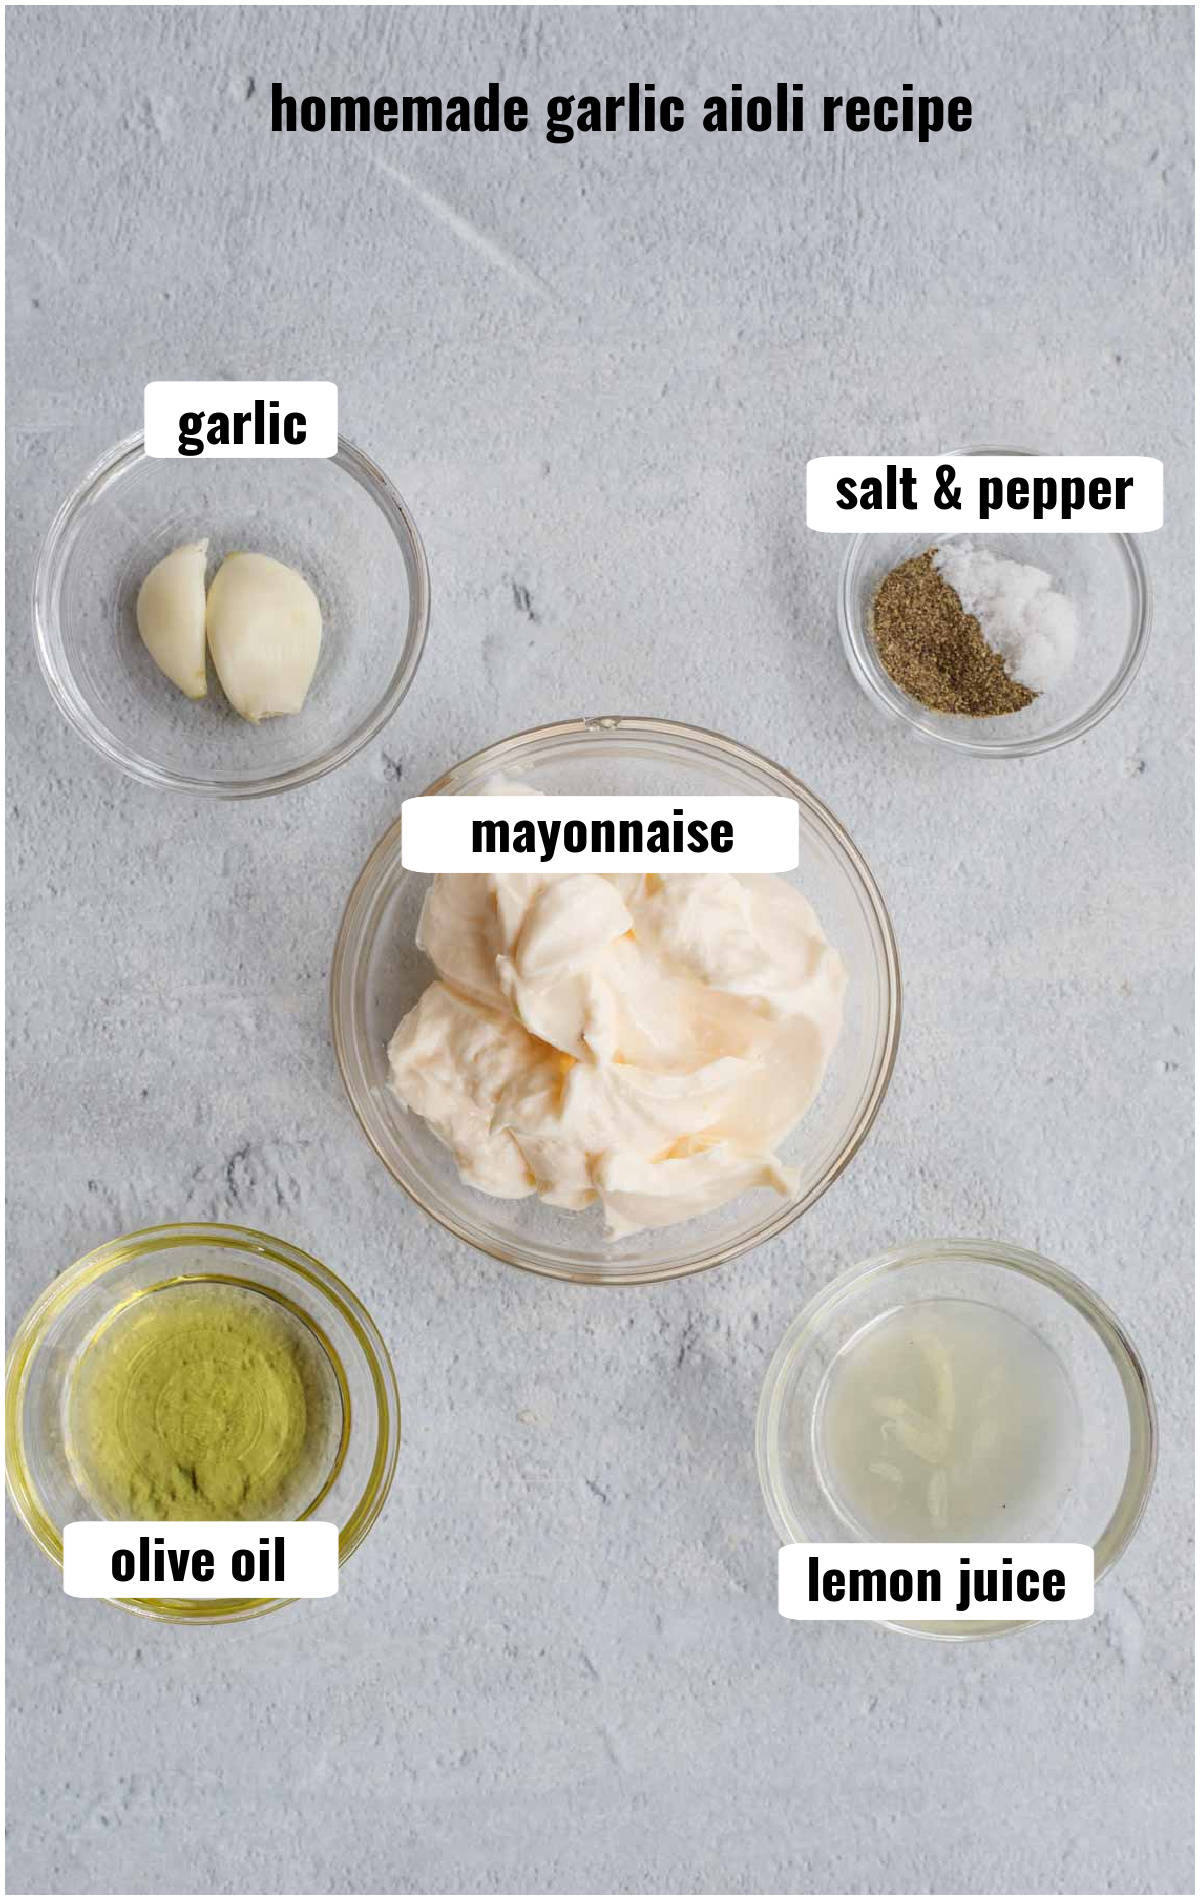 All the ingredients for garlic aioli in their own glass container.